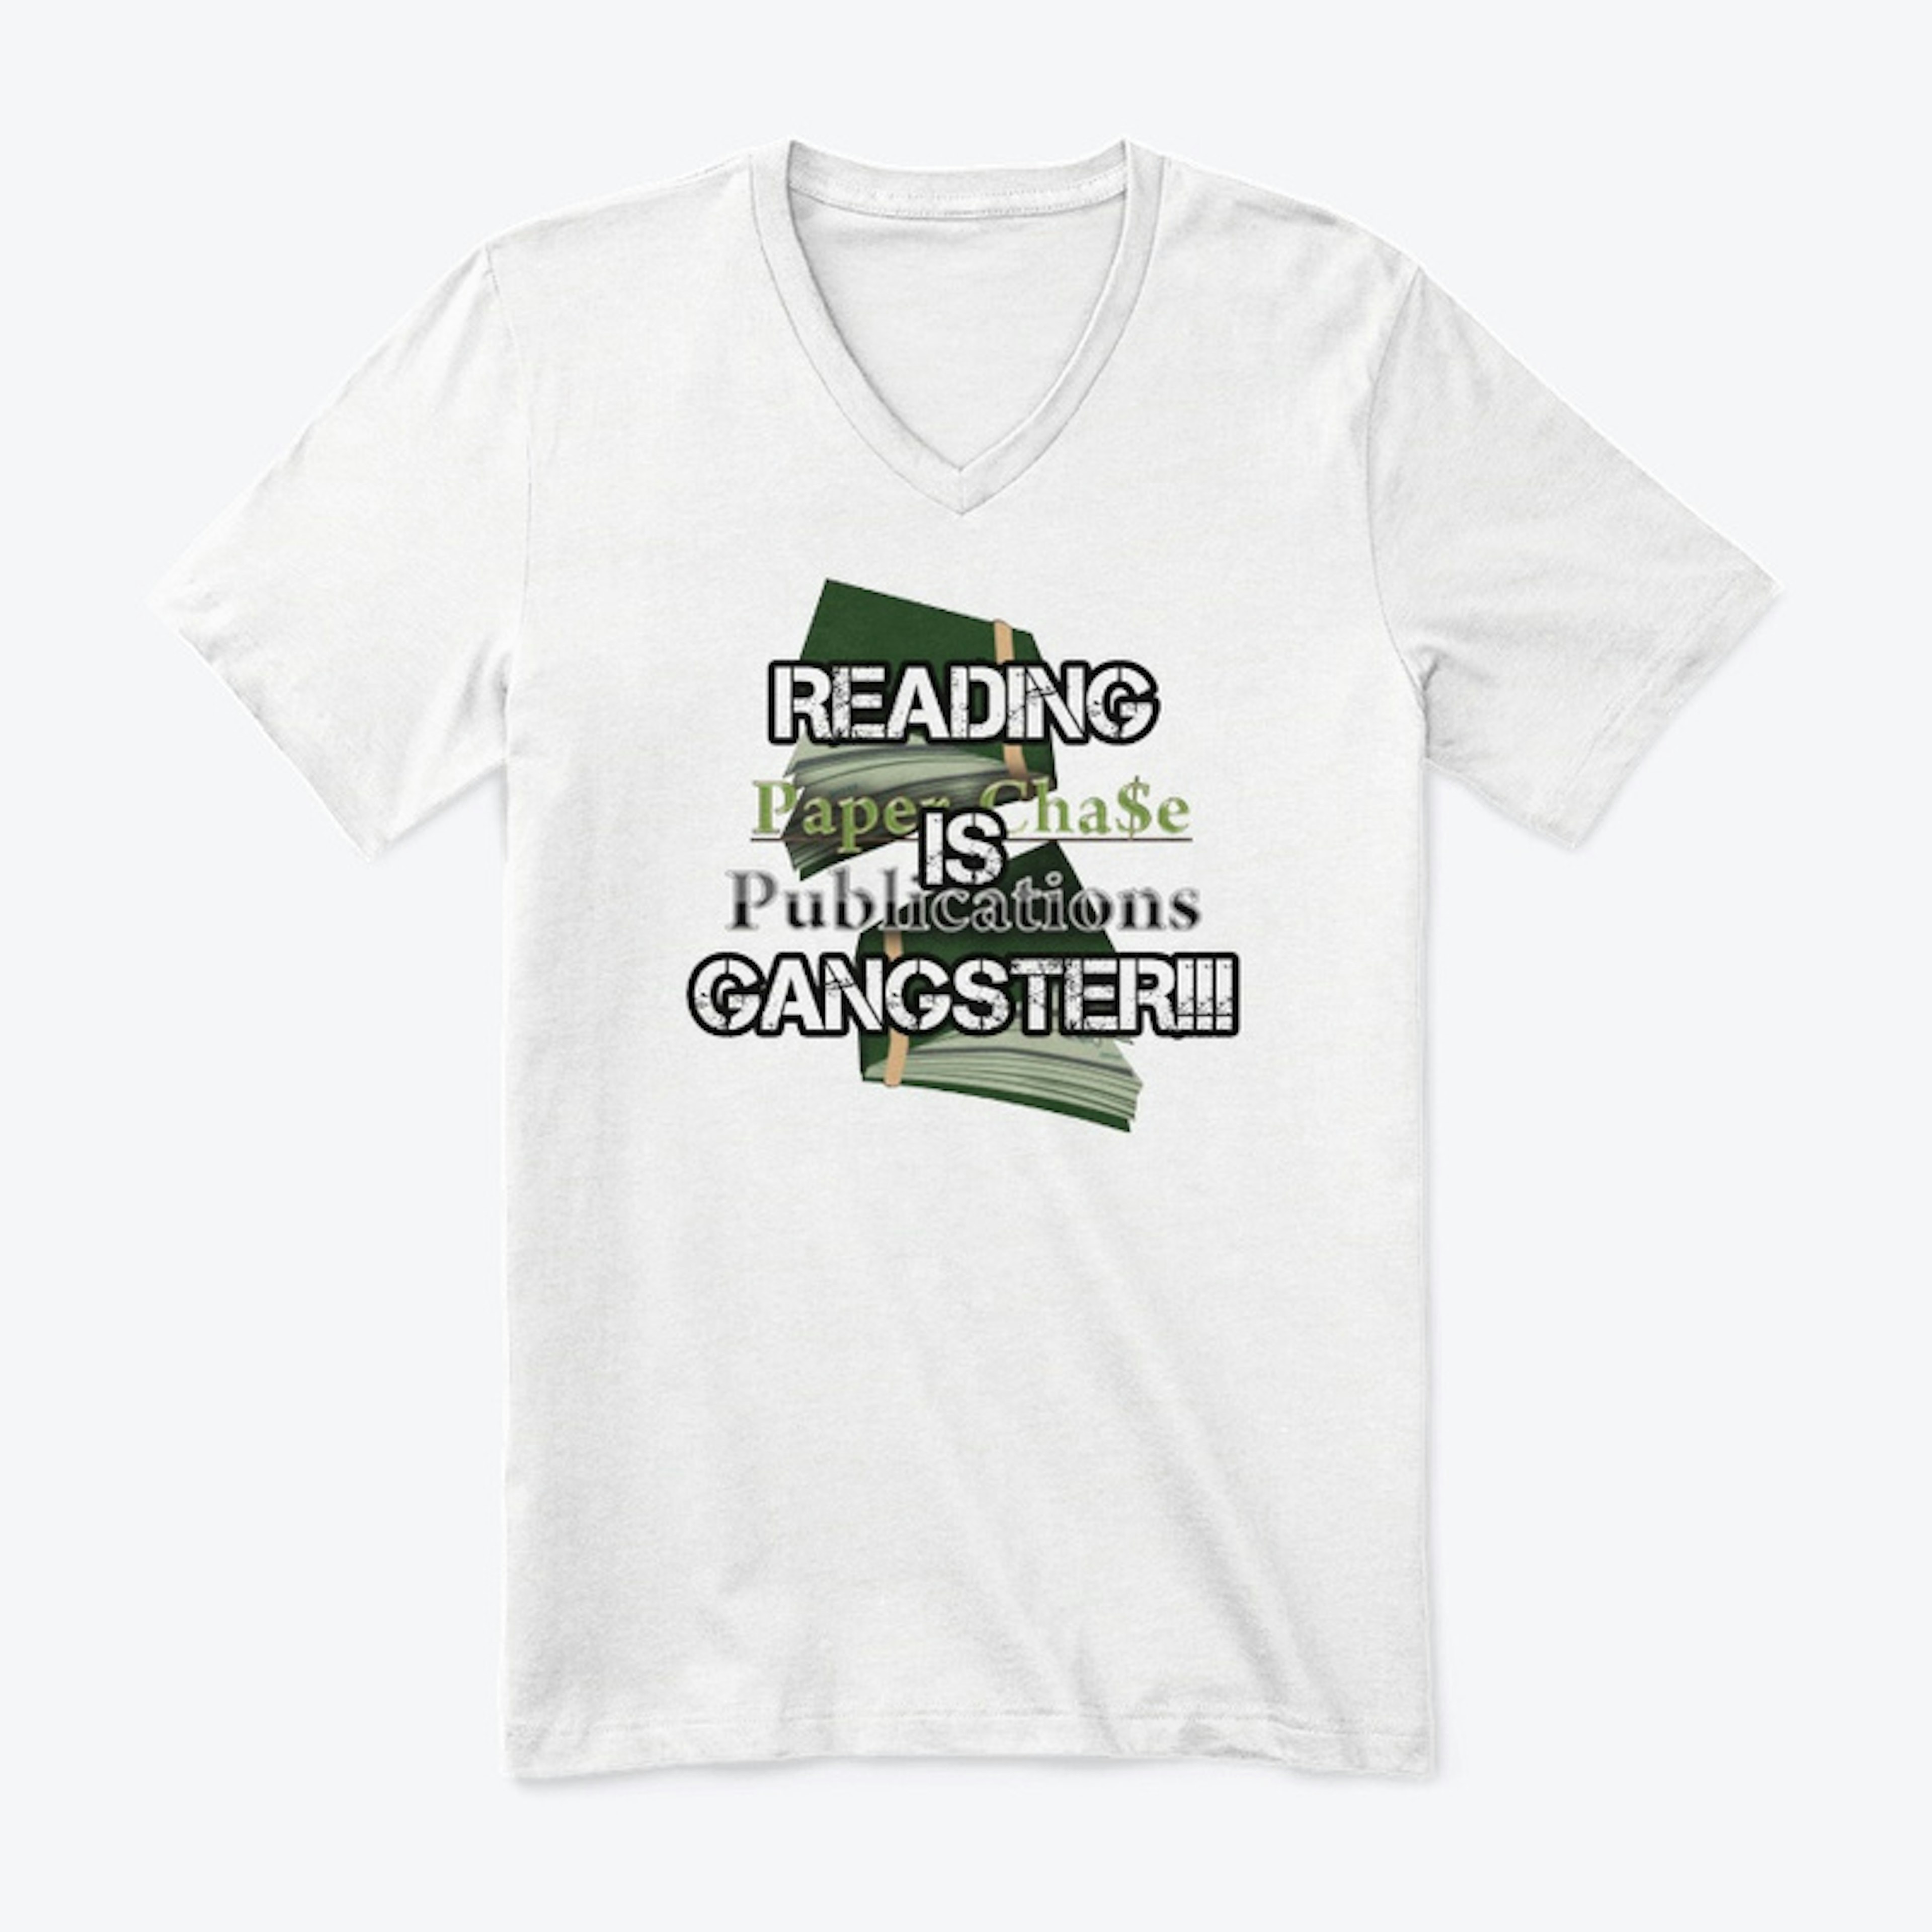 "Reading is Gangster" Official